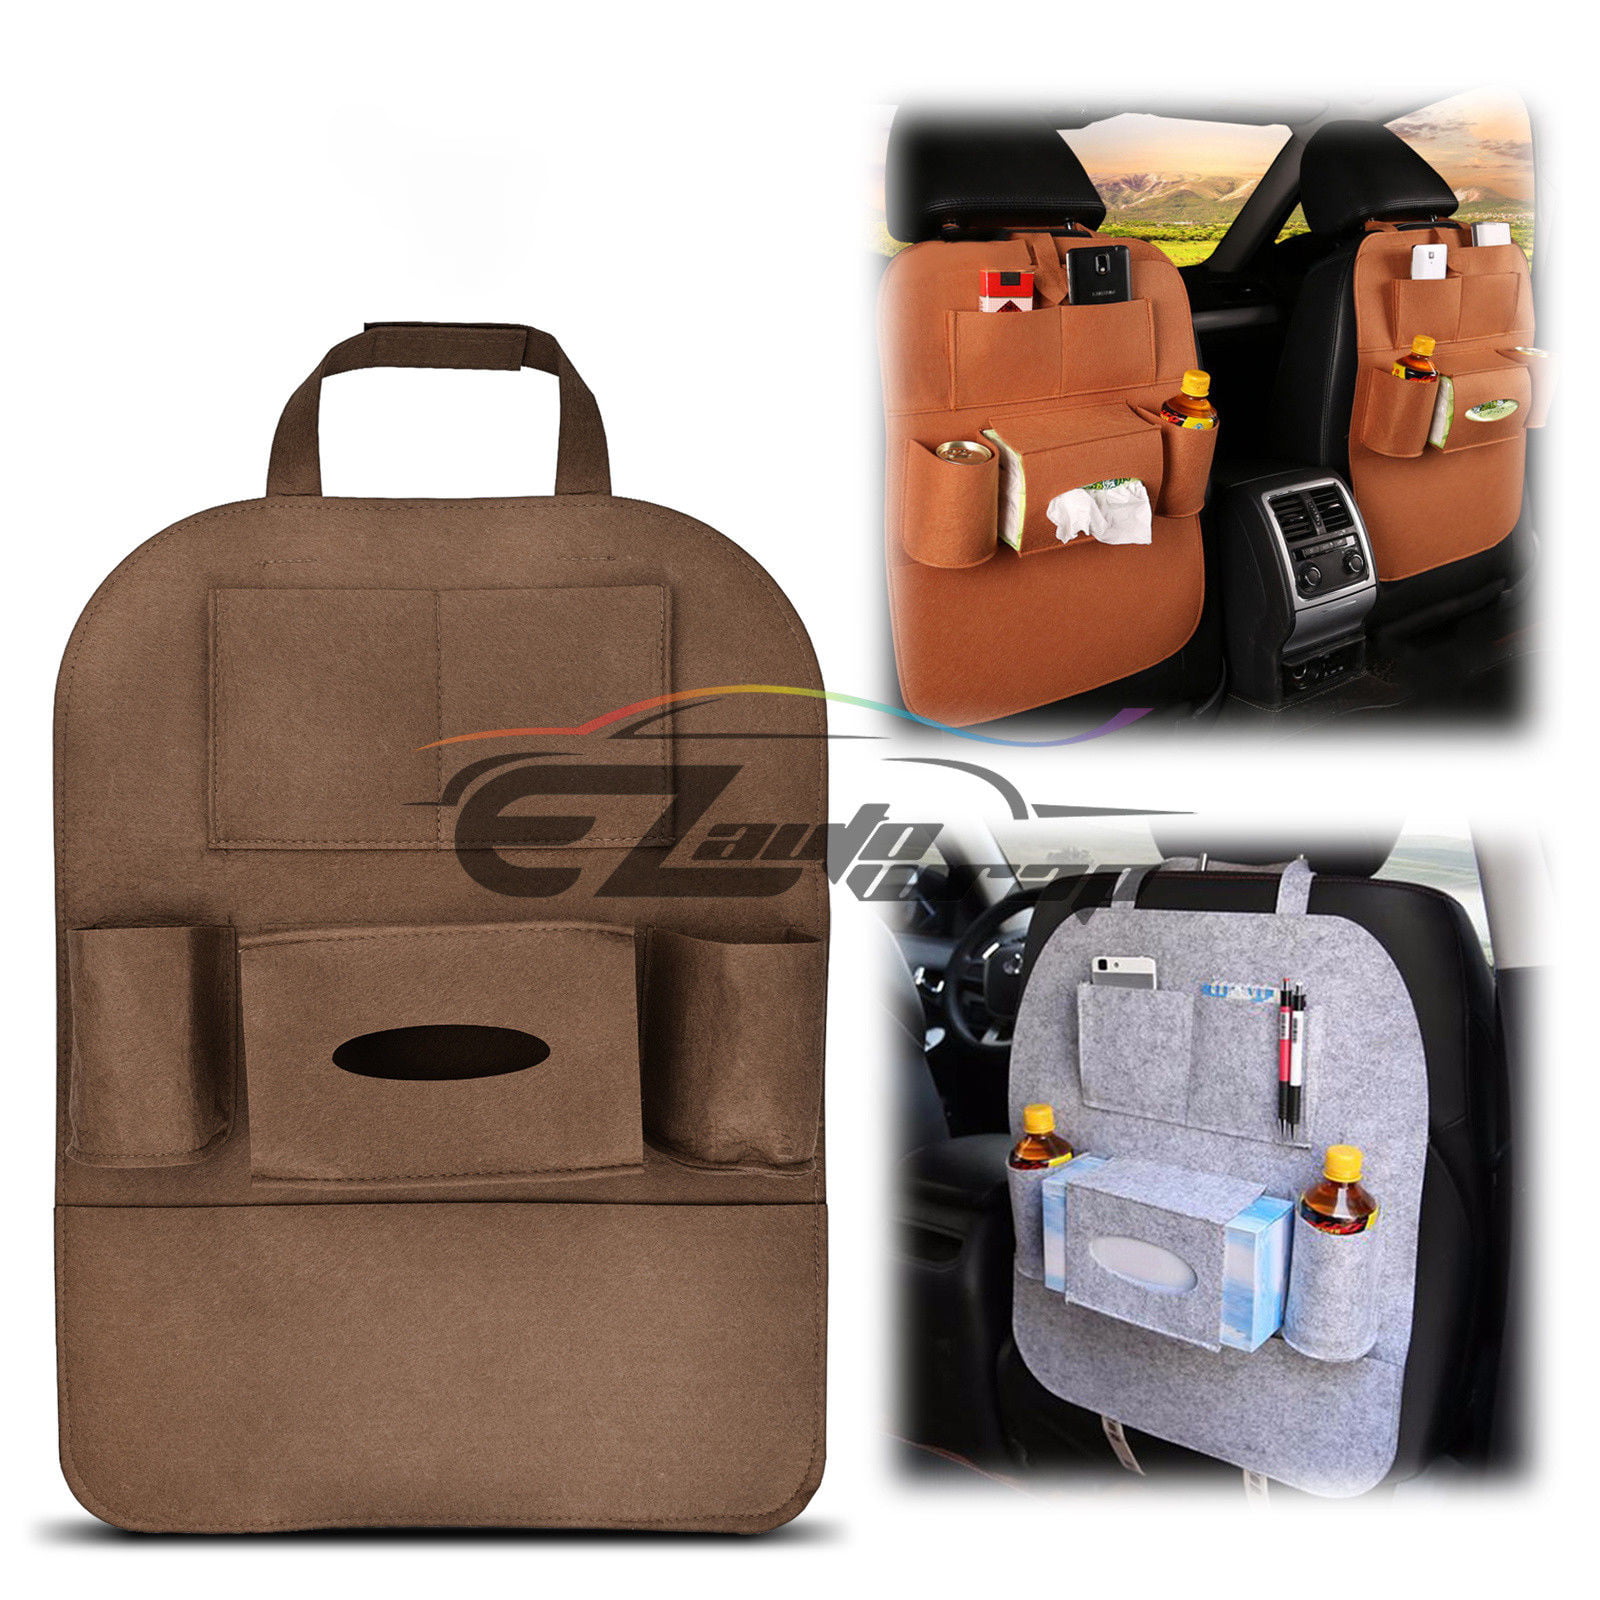 Three Layer Electronics Organizer and Travel Organizer for Tablet, Cables,  Flush Drives, and Chargers. Fit for 11